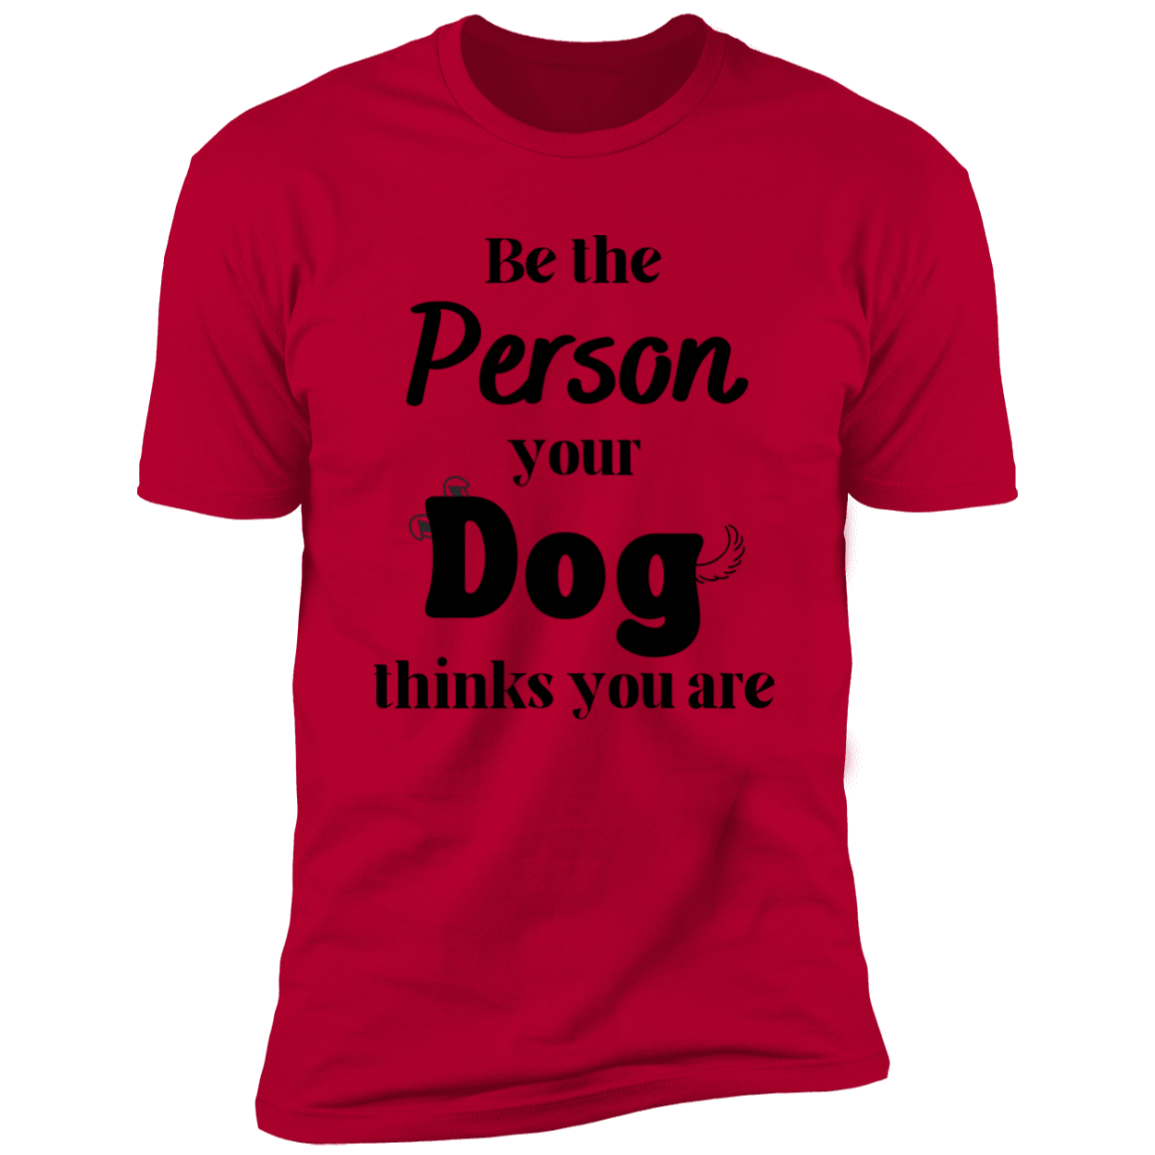 Be the Person Your Dog Thinks You Are T-shirt, Dog Shirt for humans, in red